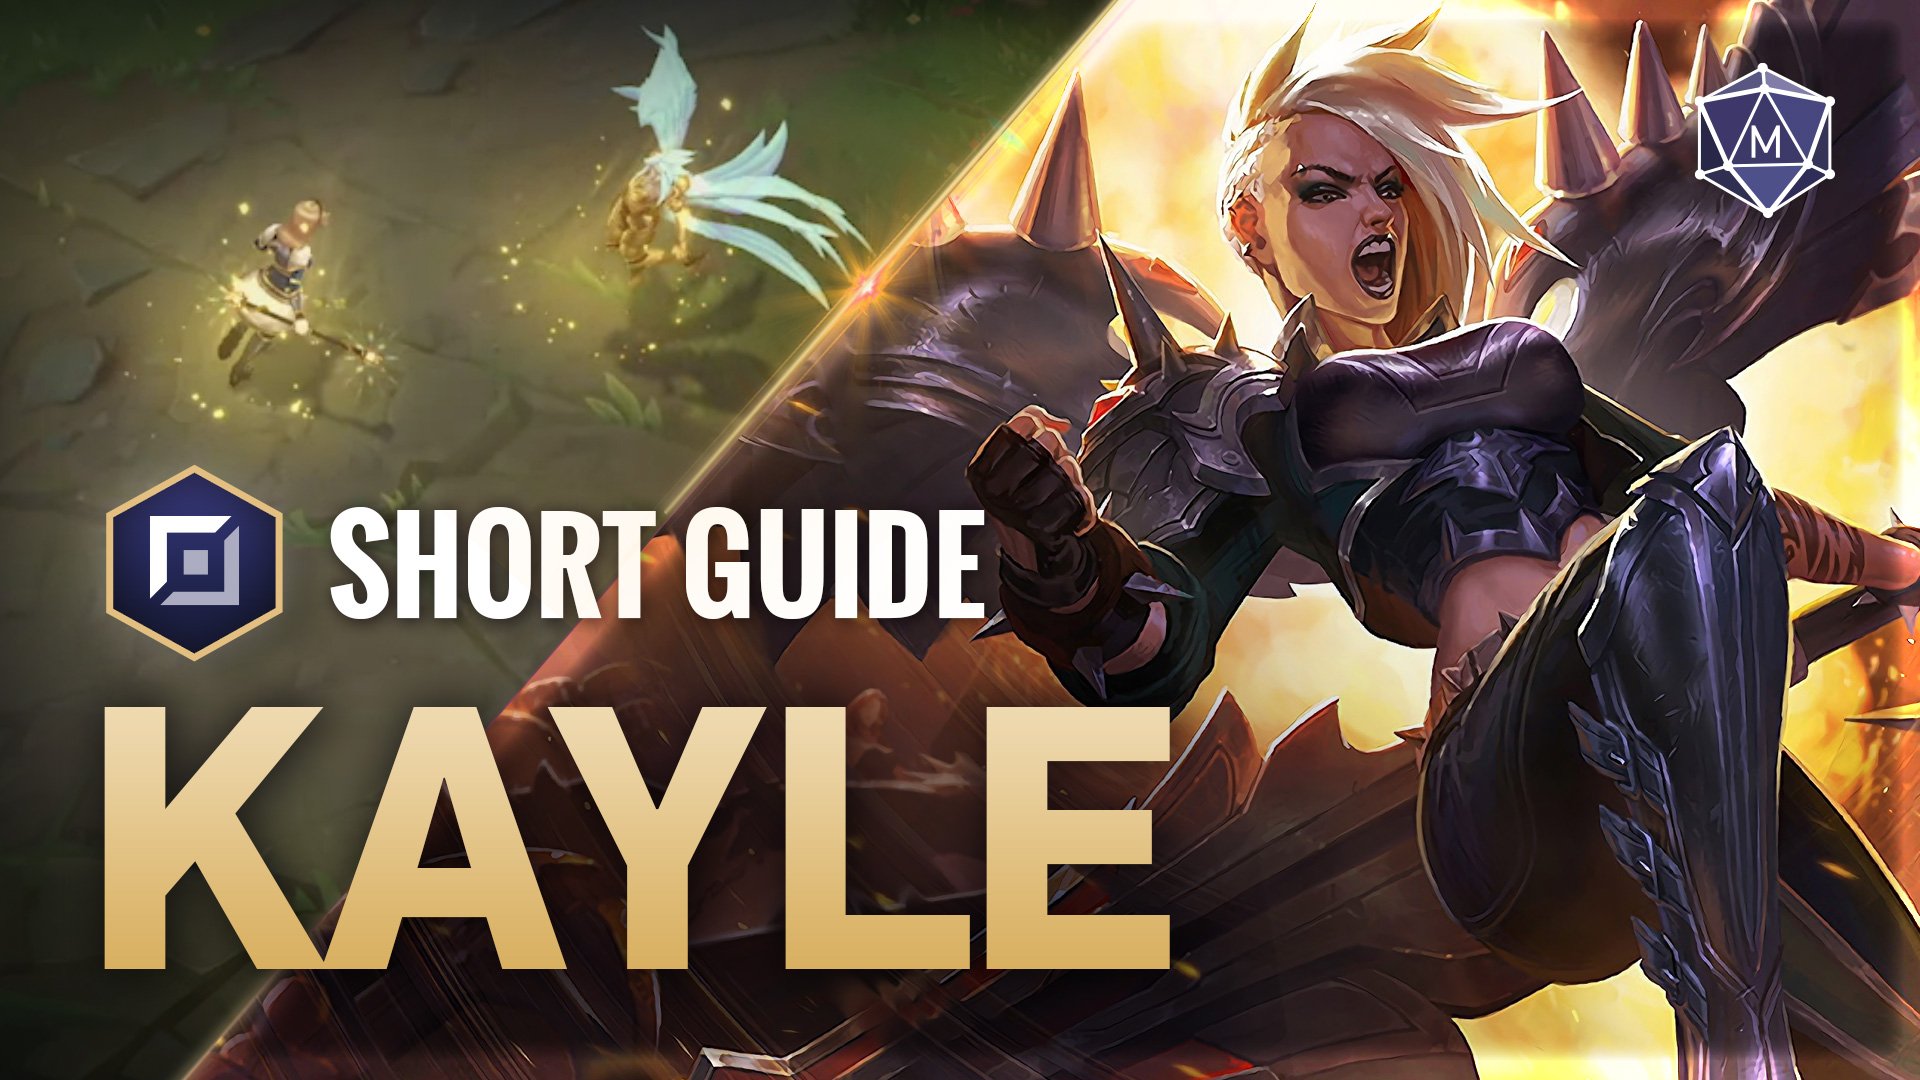 Kayle expert guide